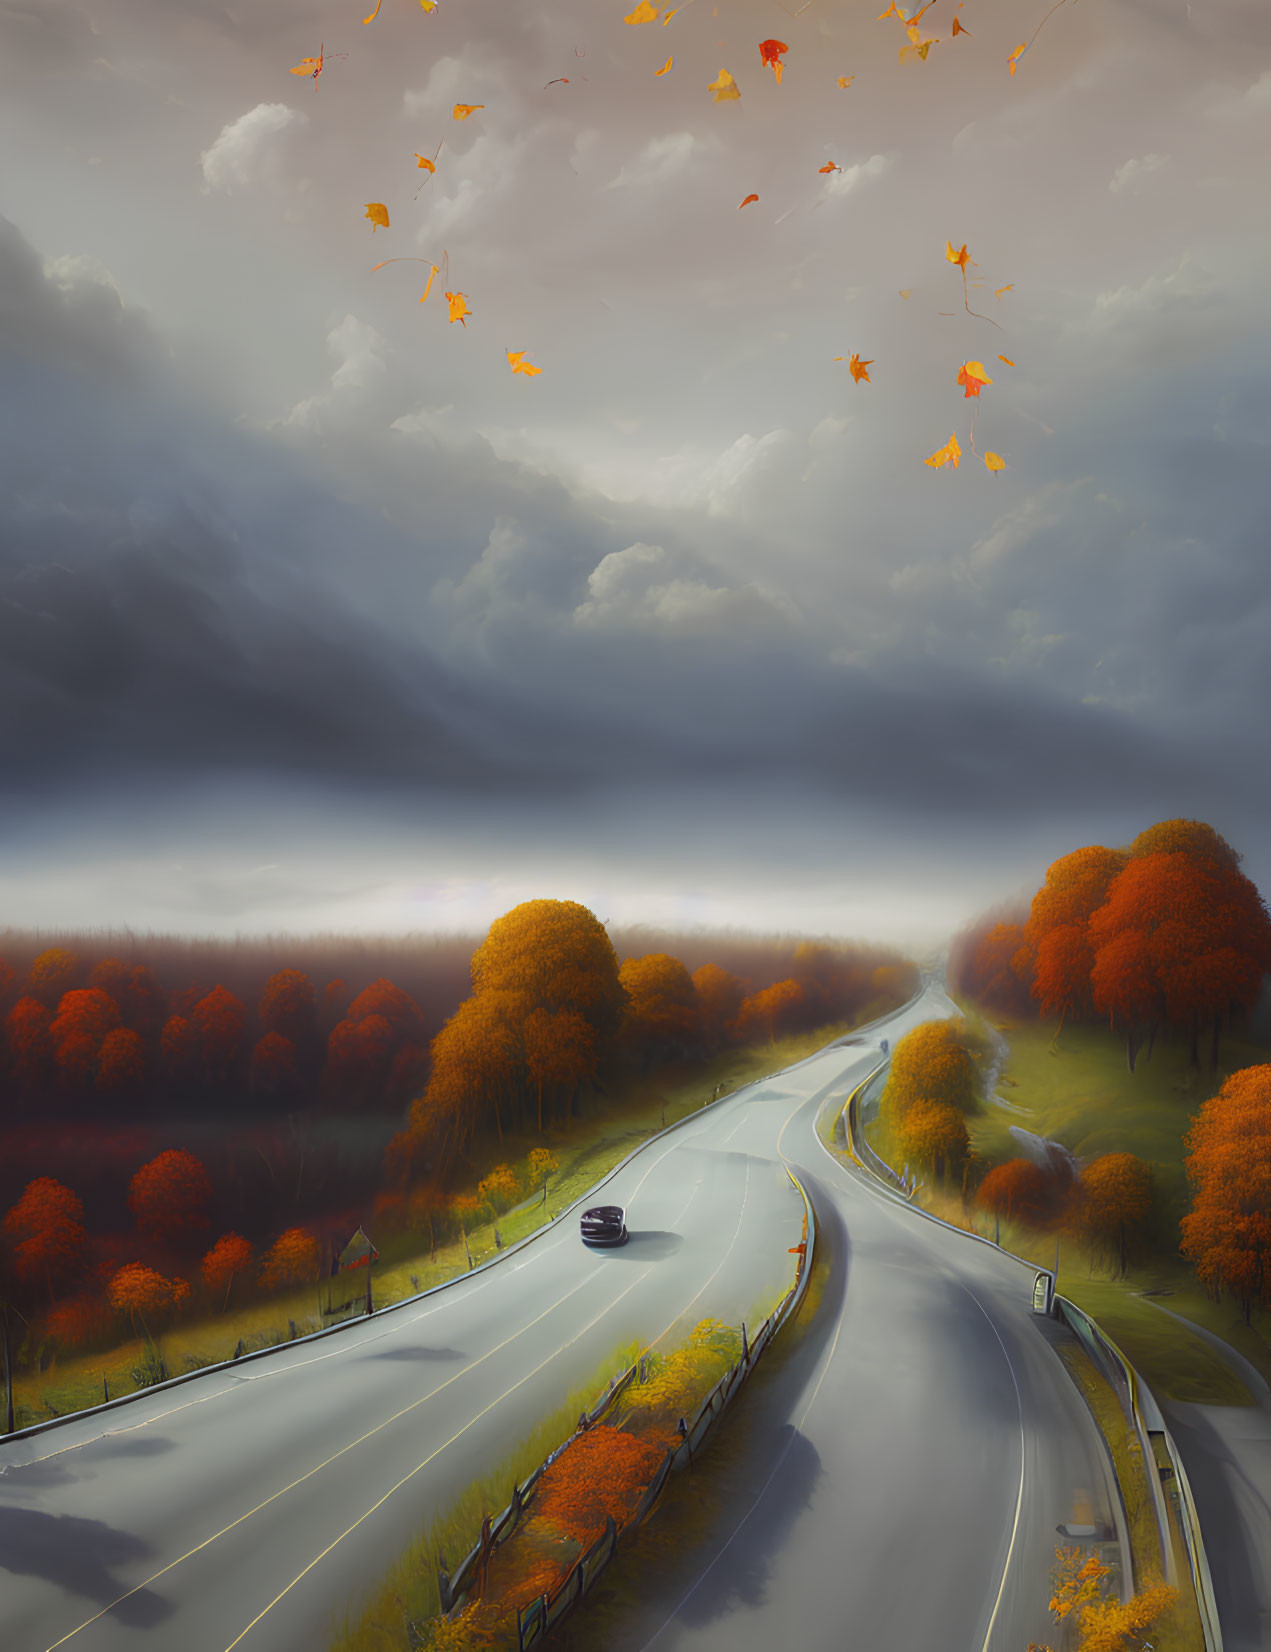 Scenic autumn landscape with car on winding road